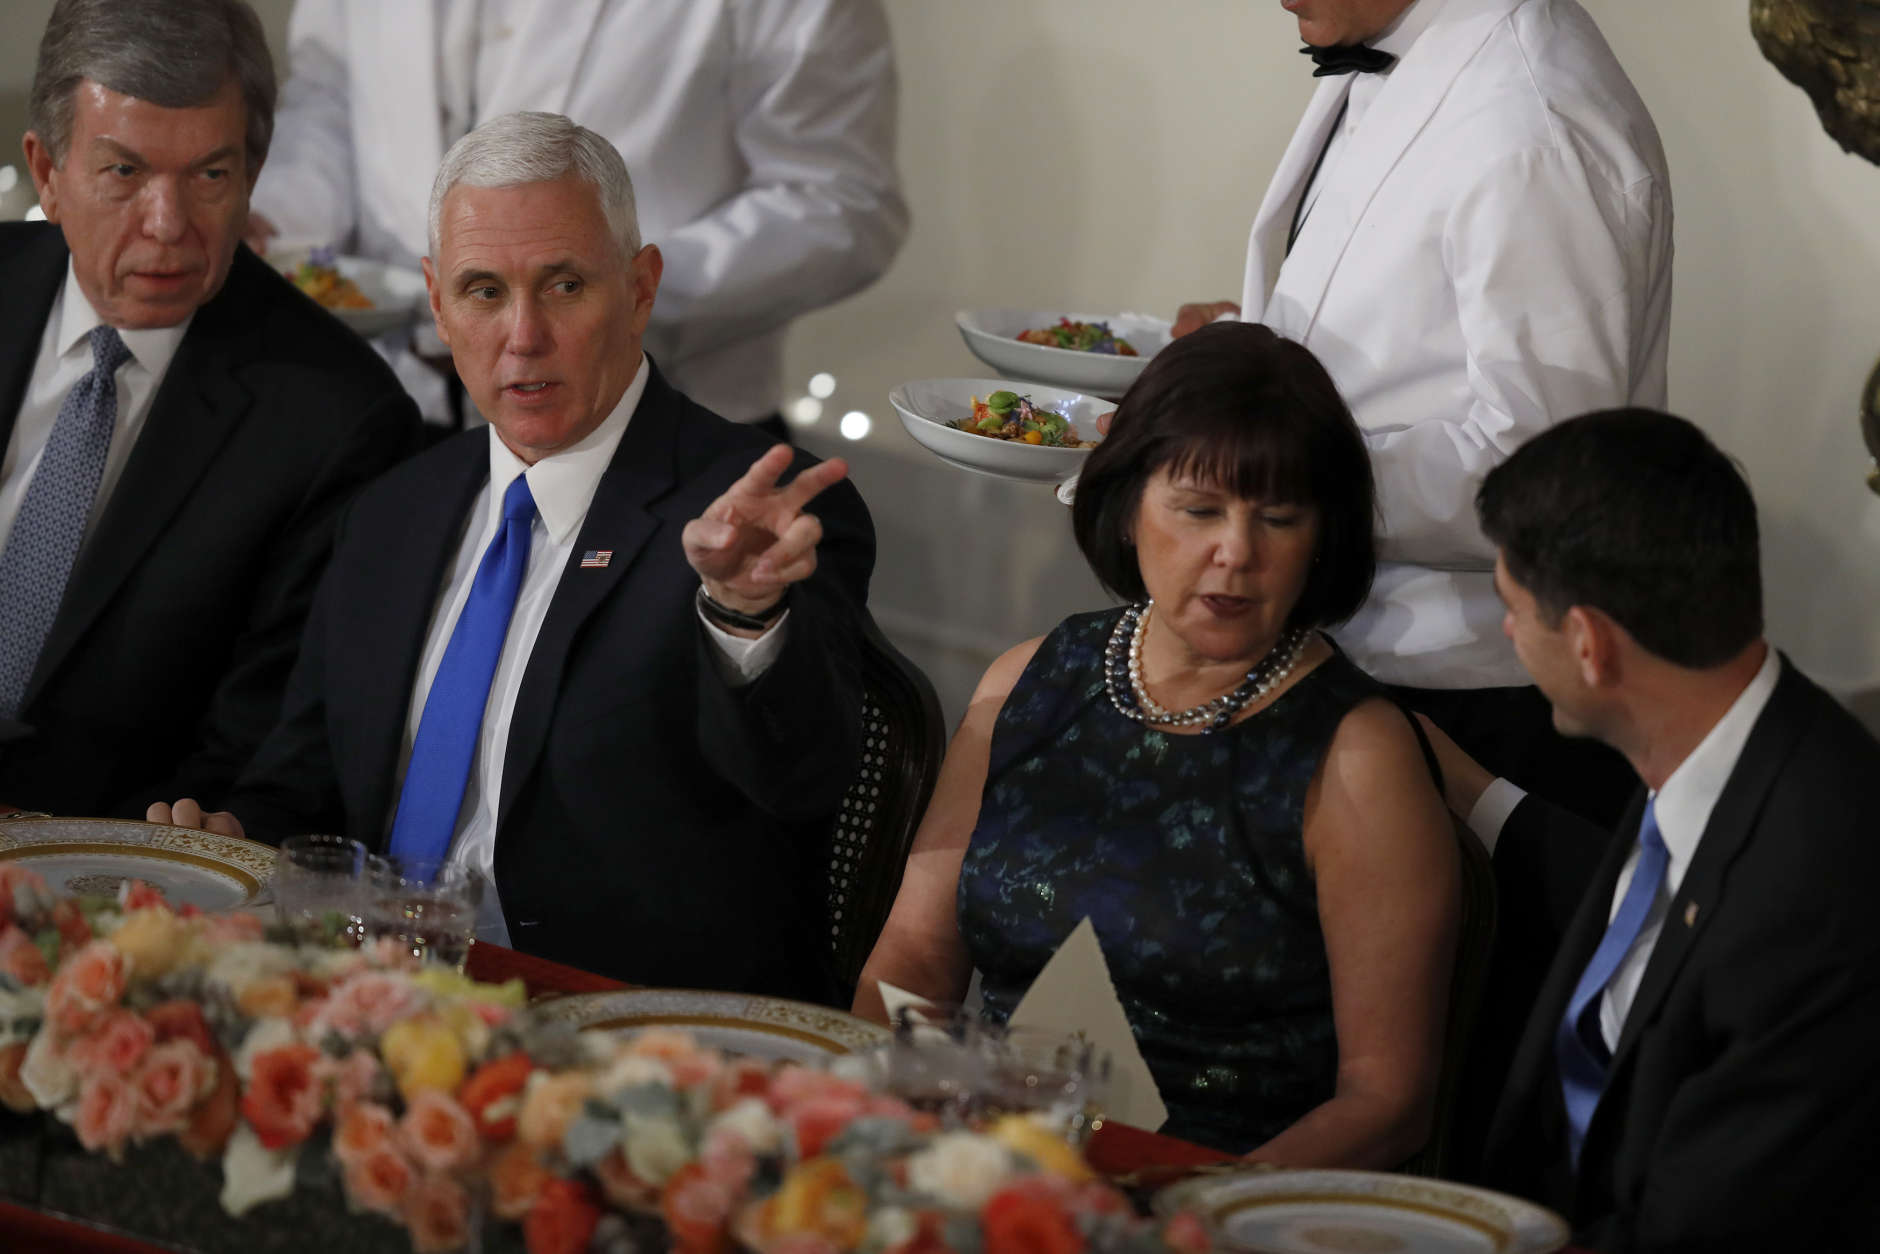 WASHINGTON, DC - JANUARY 20:  Vice President Mike Pence and his wife Karen Pence speak to Sen. Roy Blunt (R-MO) (L) and Speaker of the House Paul Ryan (R) during the Inaugural Luncheon in the US Capitol January 20, 2017 in Washington, DC. President Trump will attend the luncheon along with other dignitaries after being sworn in as the 45th President of the United States. (Photo by Aaron P. Bernstein/Getty Images)